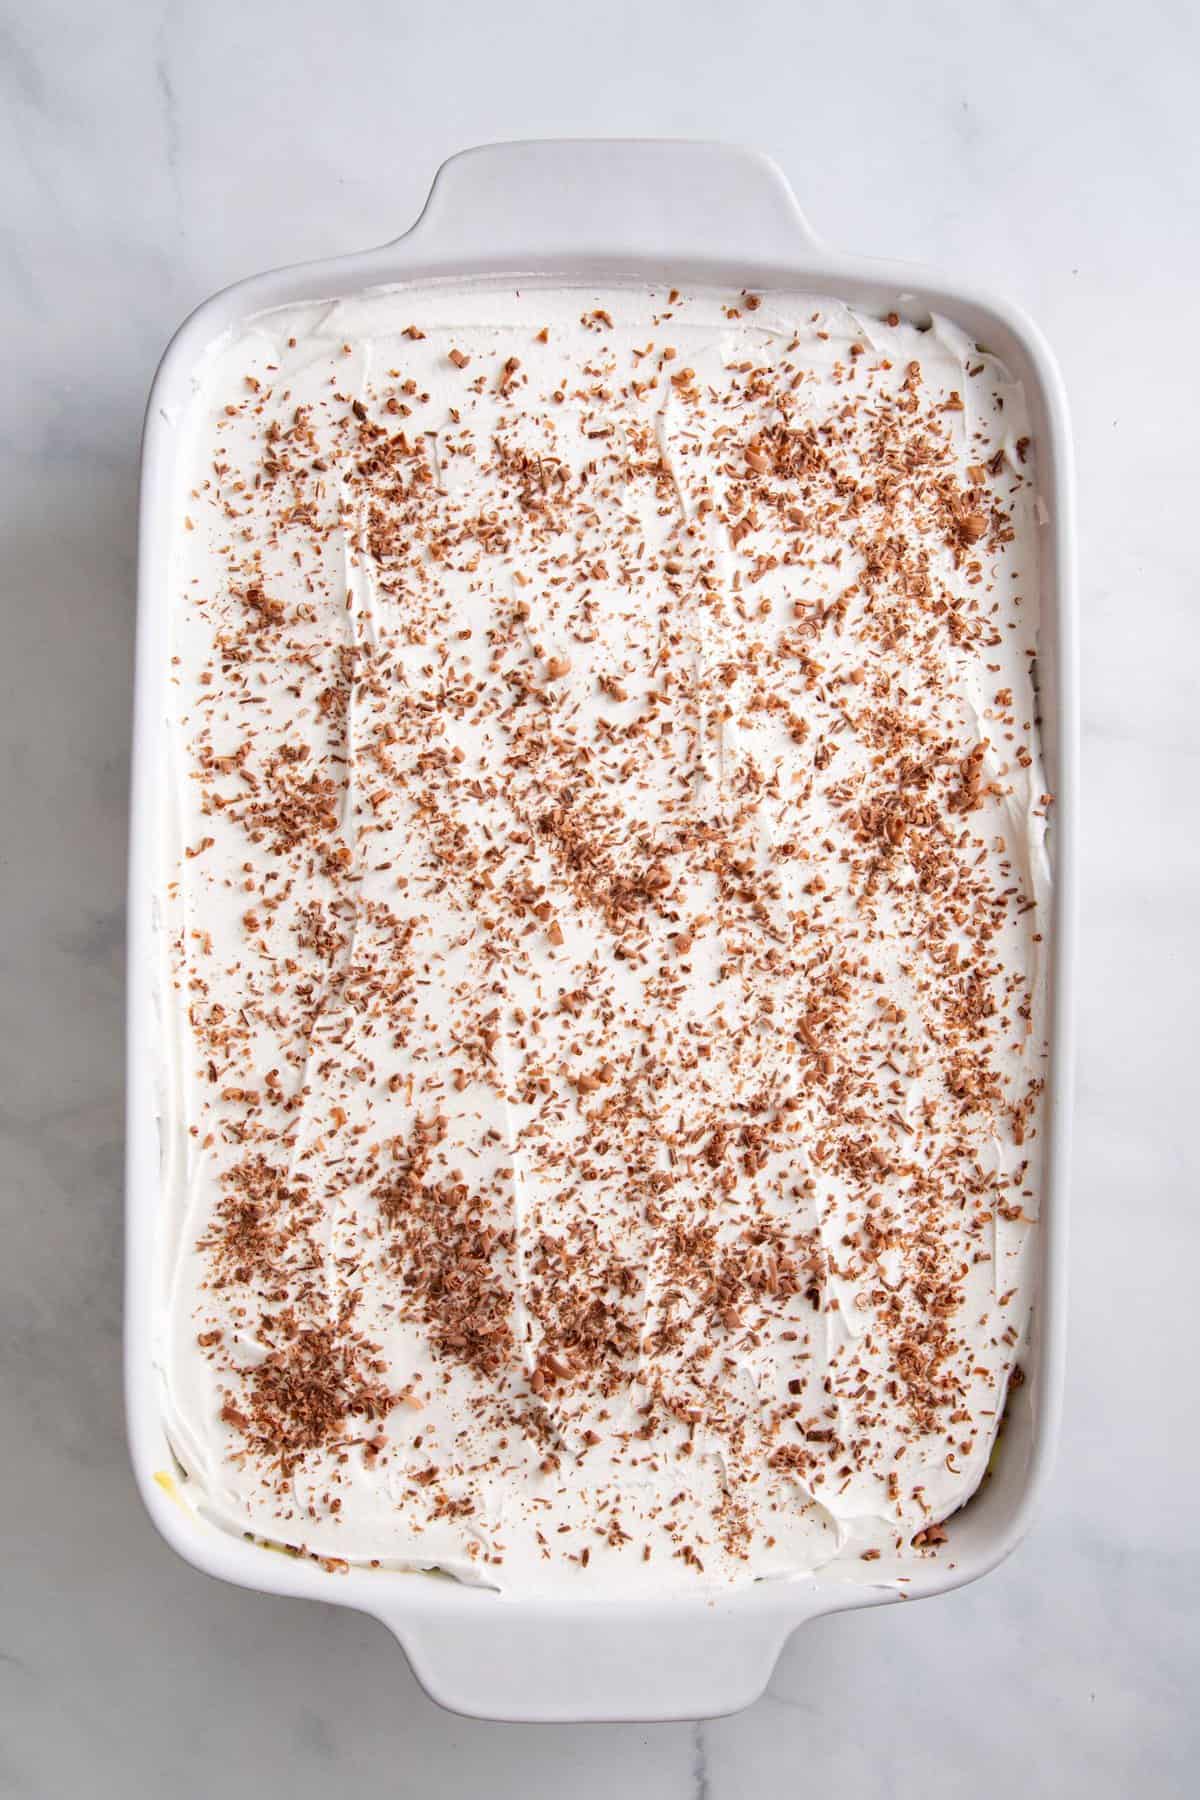 cool whip layered evenly topped with chocolate shavings sitting in a 9x13 baking dish